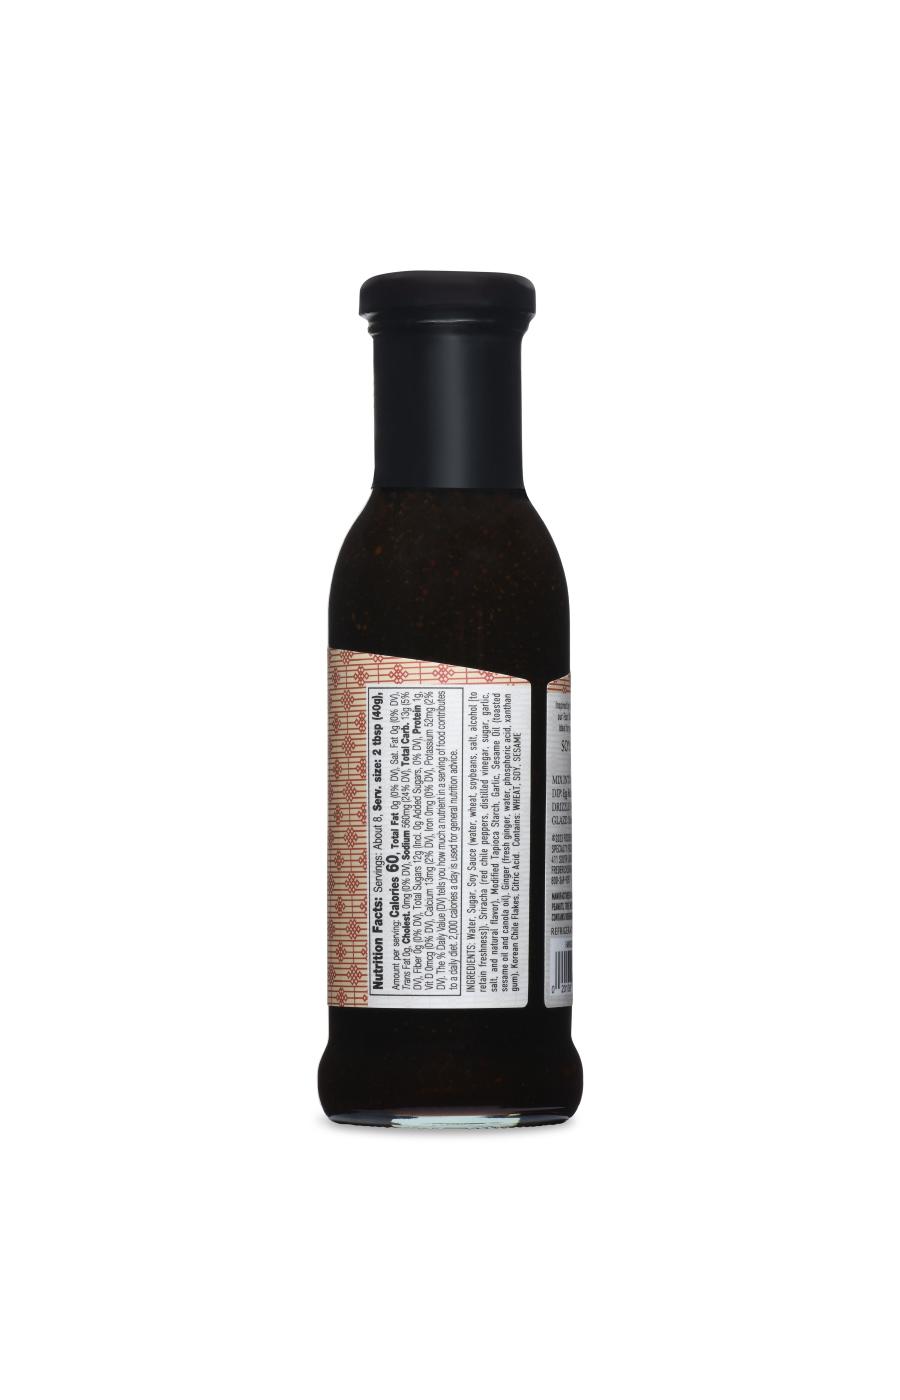 Fischer & Wieser Four Star Provisions Soy Sriracha Glaze; image 2 of 3